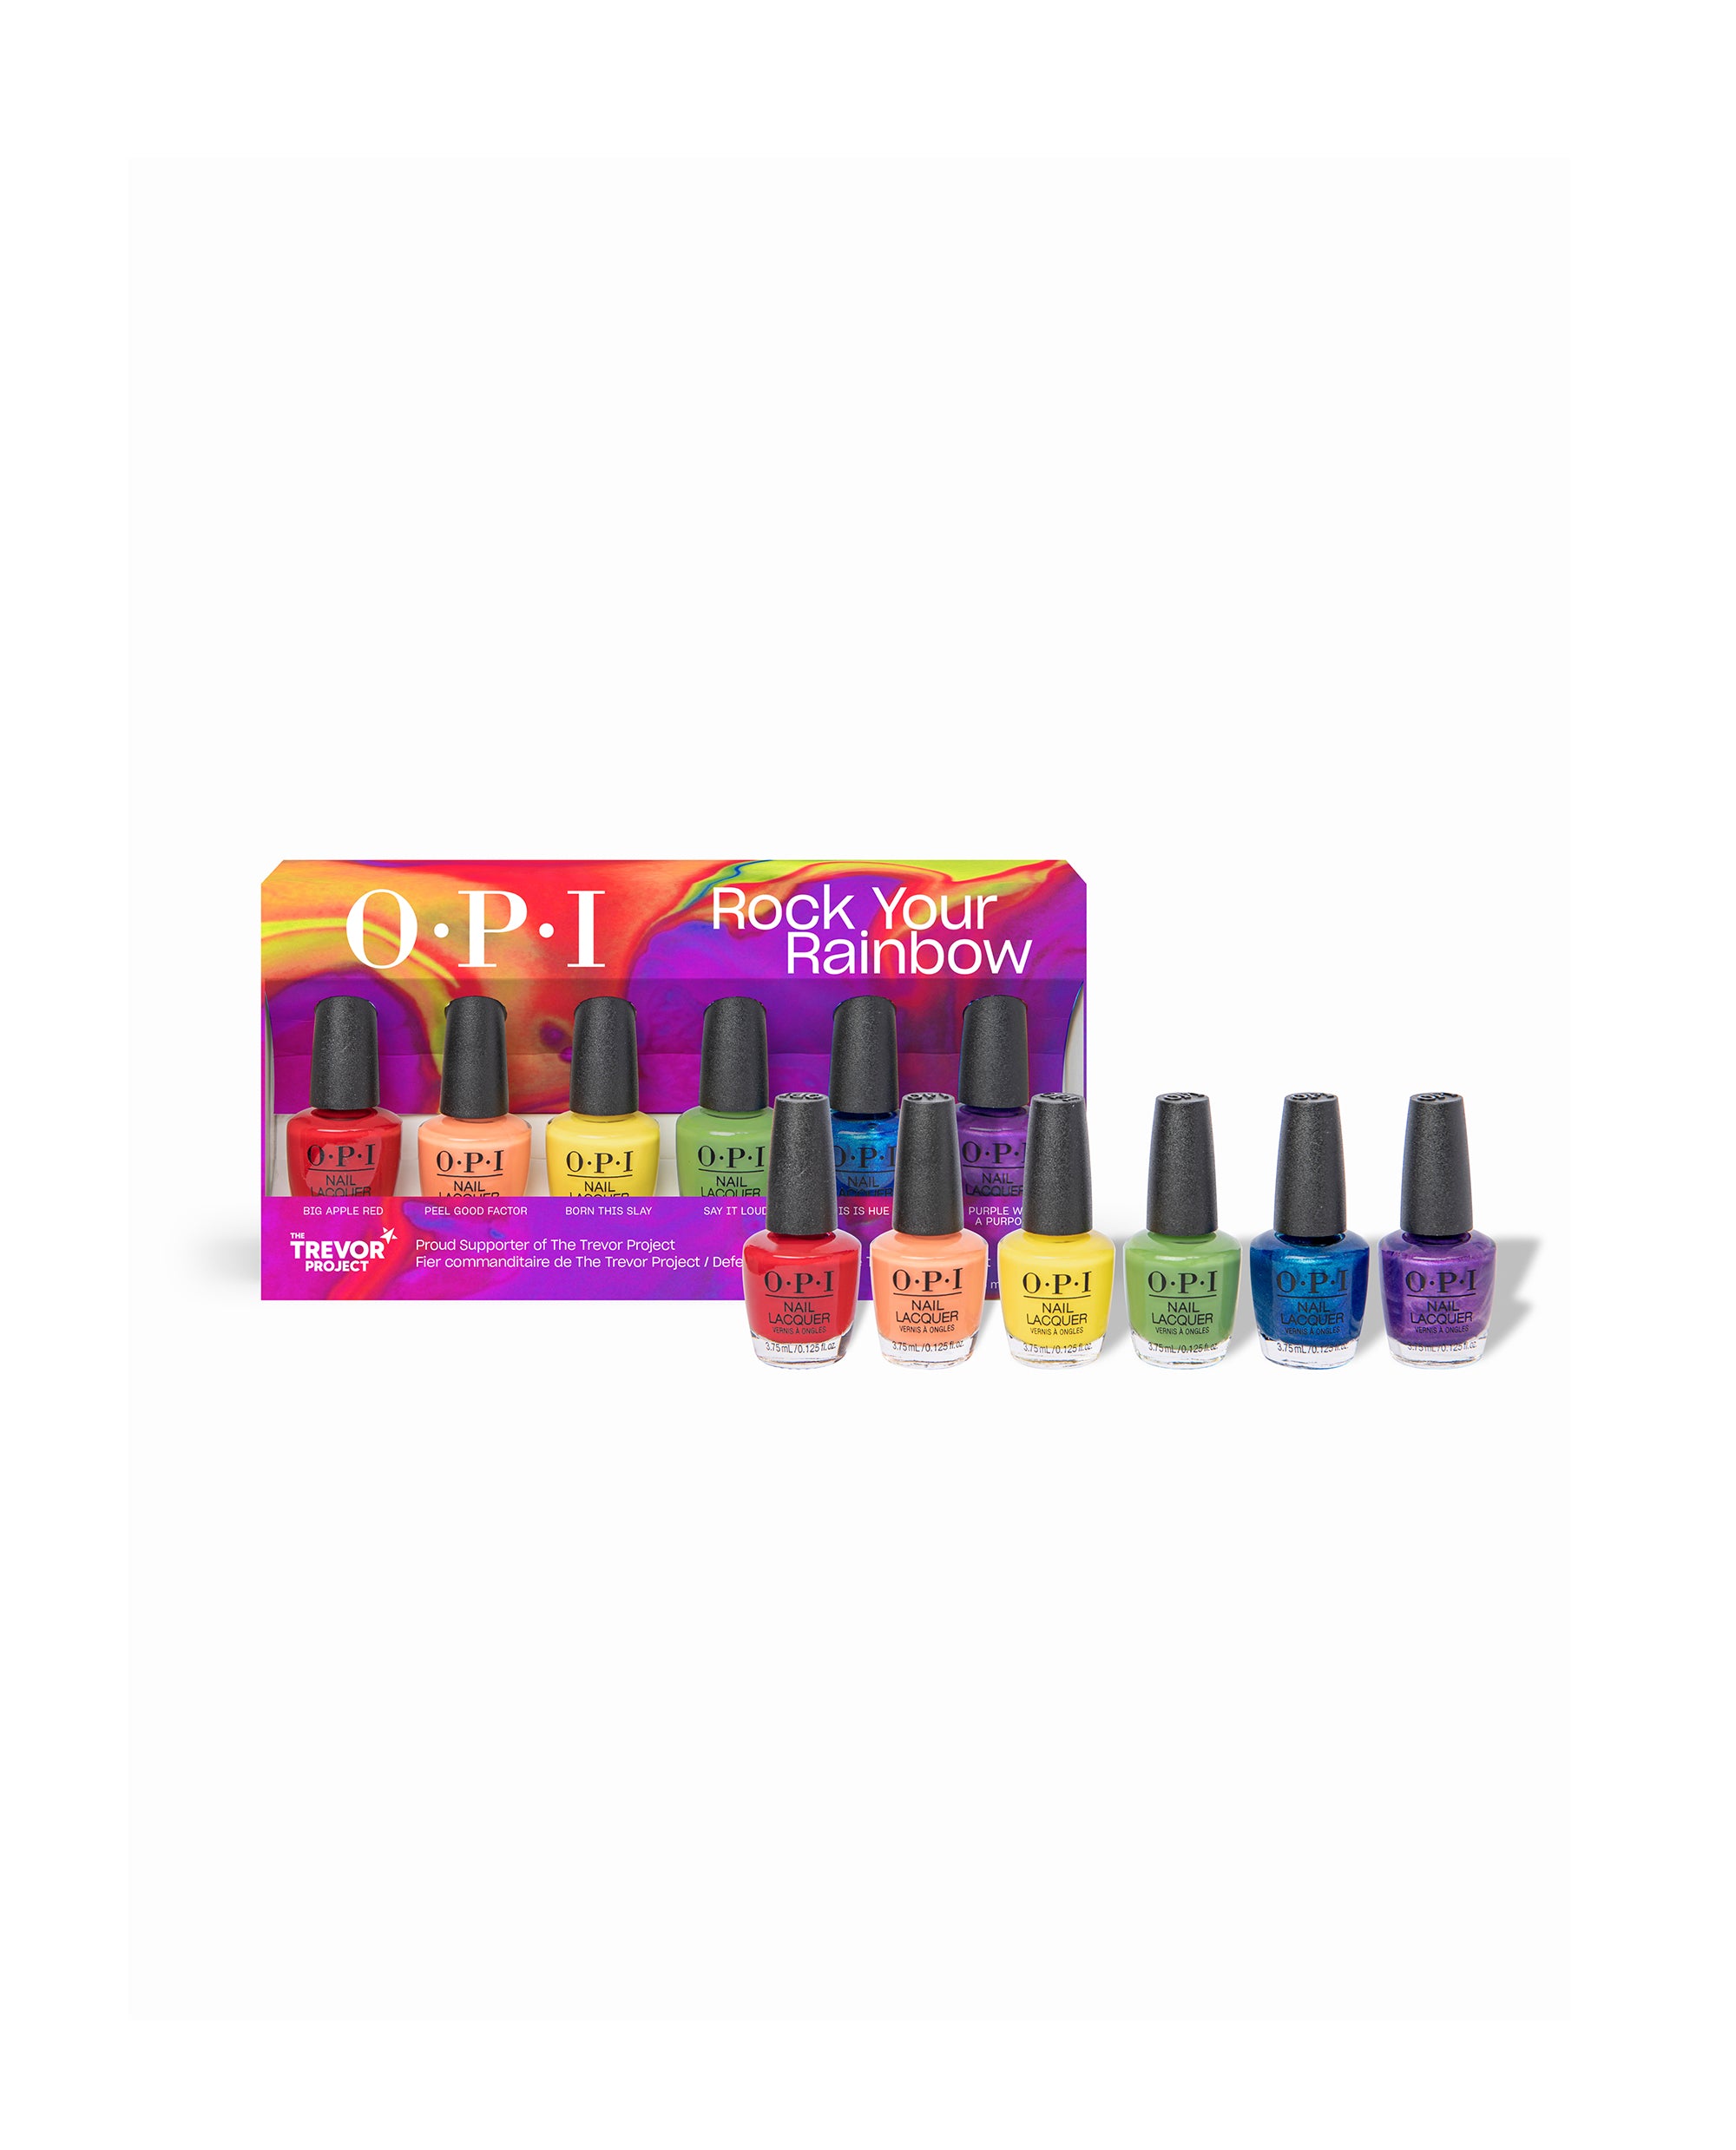 Buy Makeup Mania Nail Polish Set, Velvet Matte Nail Paint Combo Set of 4  Pcs, Multicolor Nail Polish Combo 12 ml each bottle (Set # 65) Online at  Low Prices in India - Amazon.in